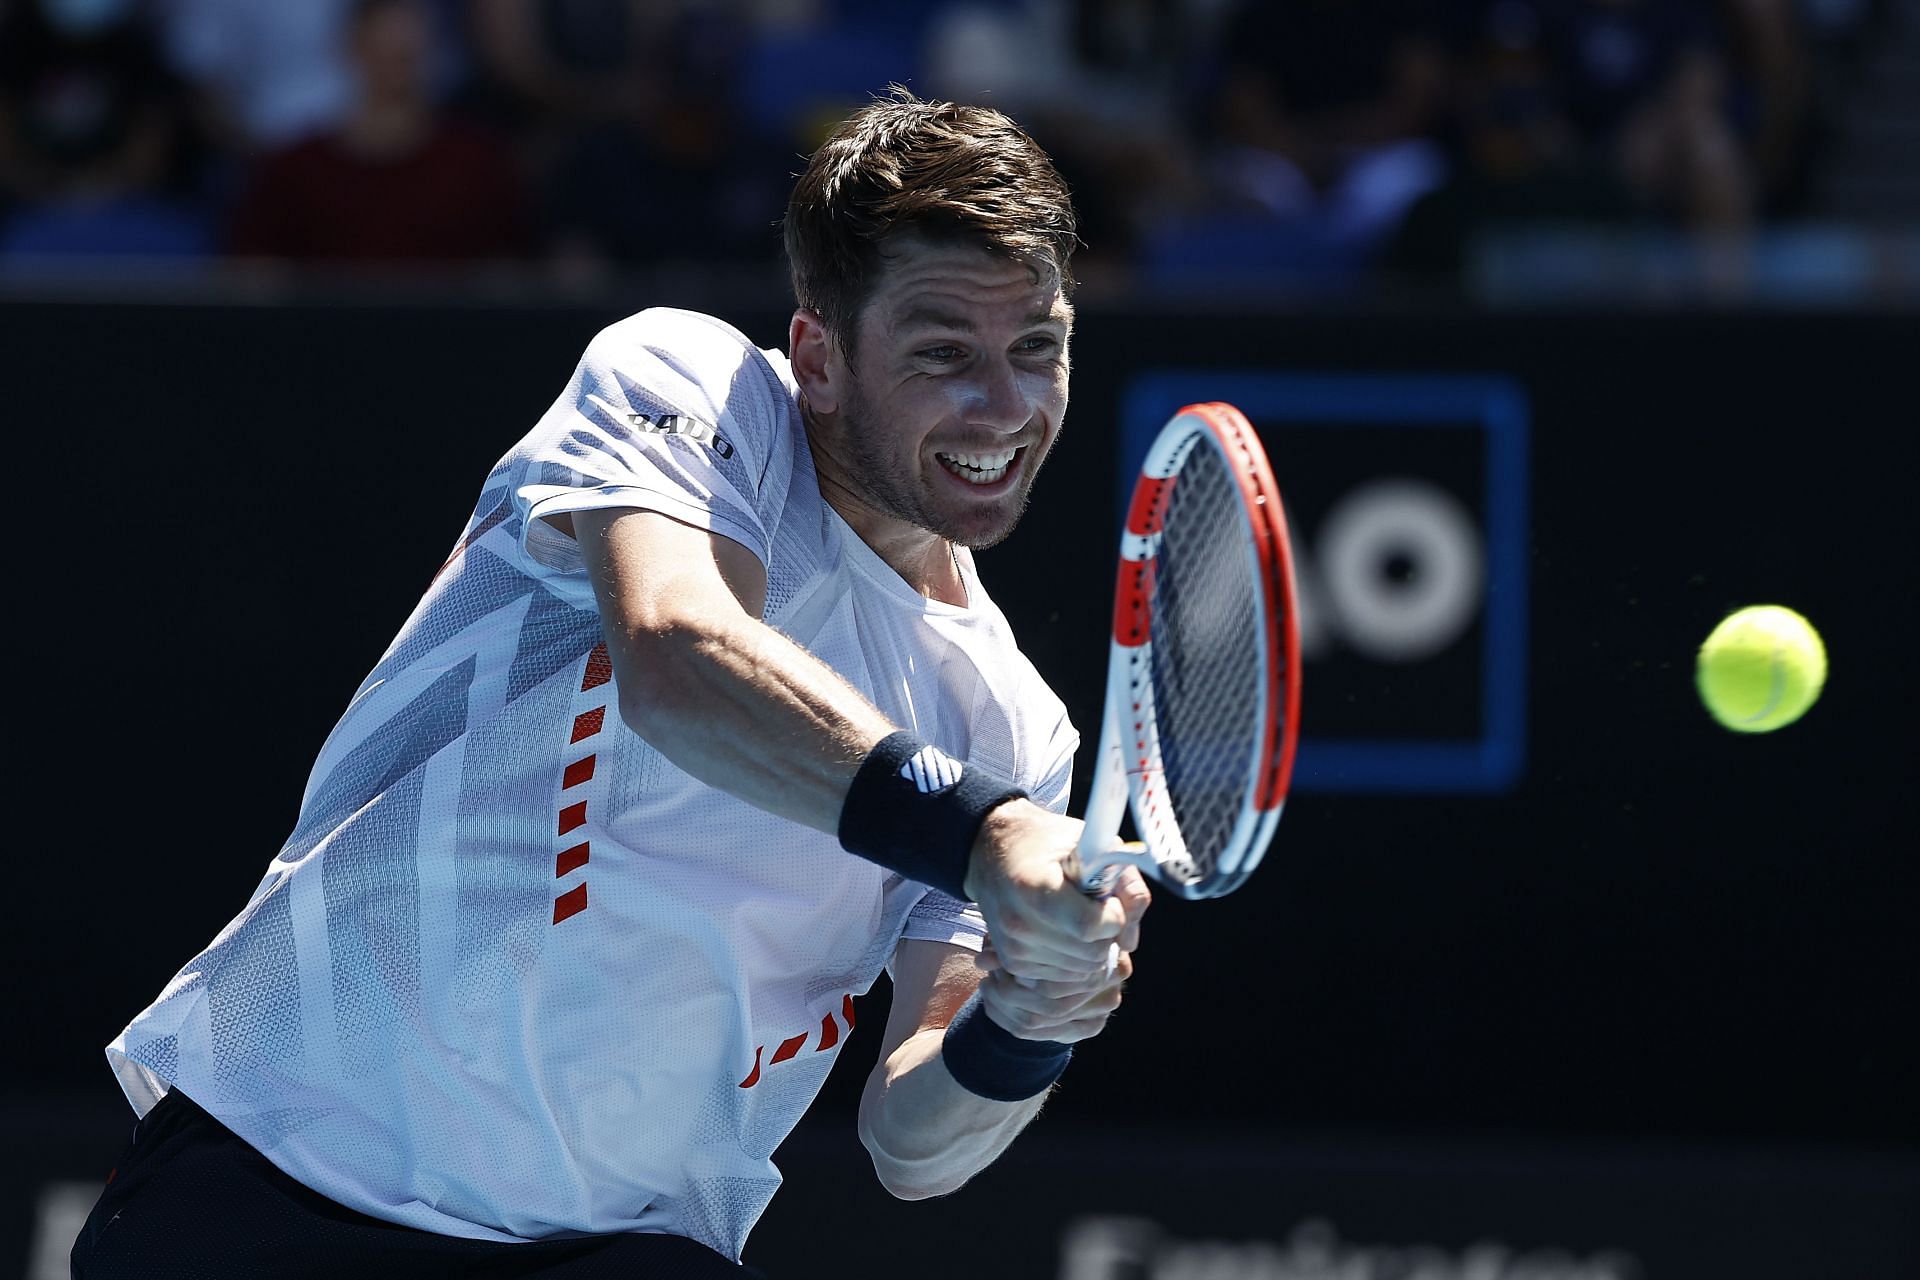 Cameron Norrie will be looking to reach the quarterfinals of the Rotterdam Open by beating Karen Khachanov.